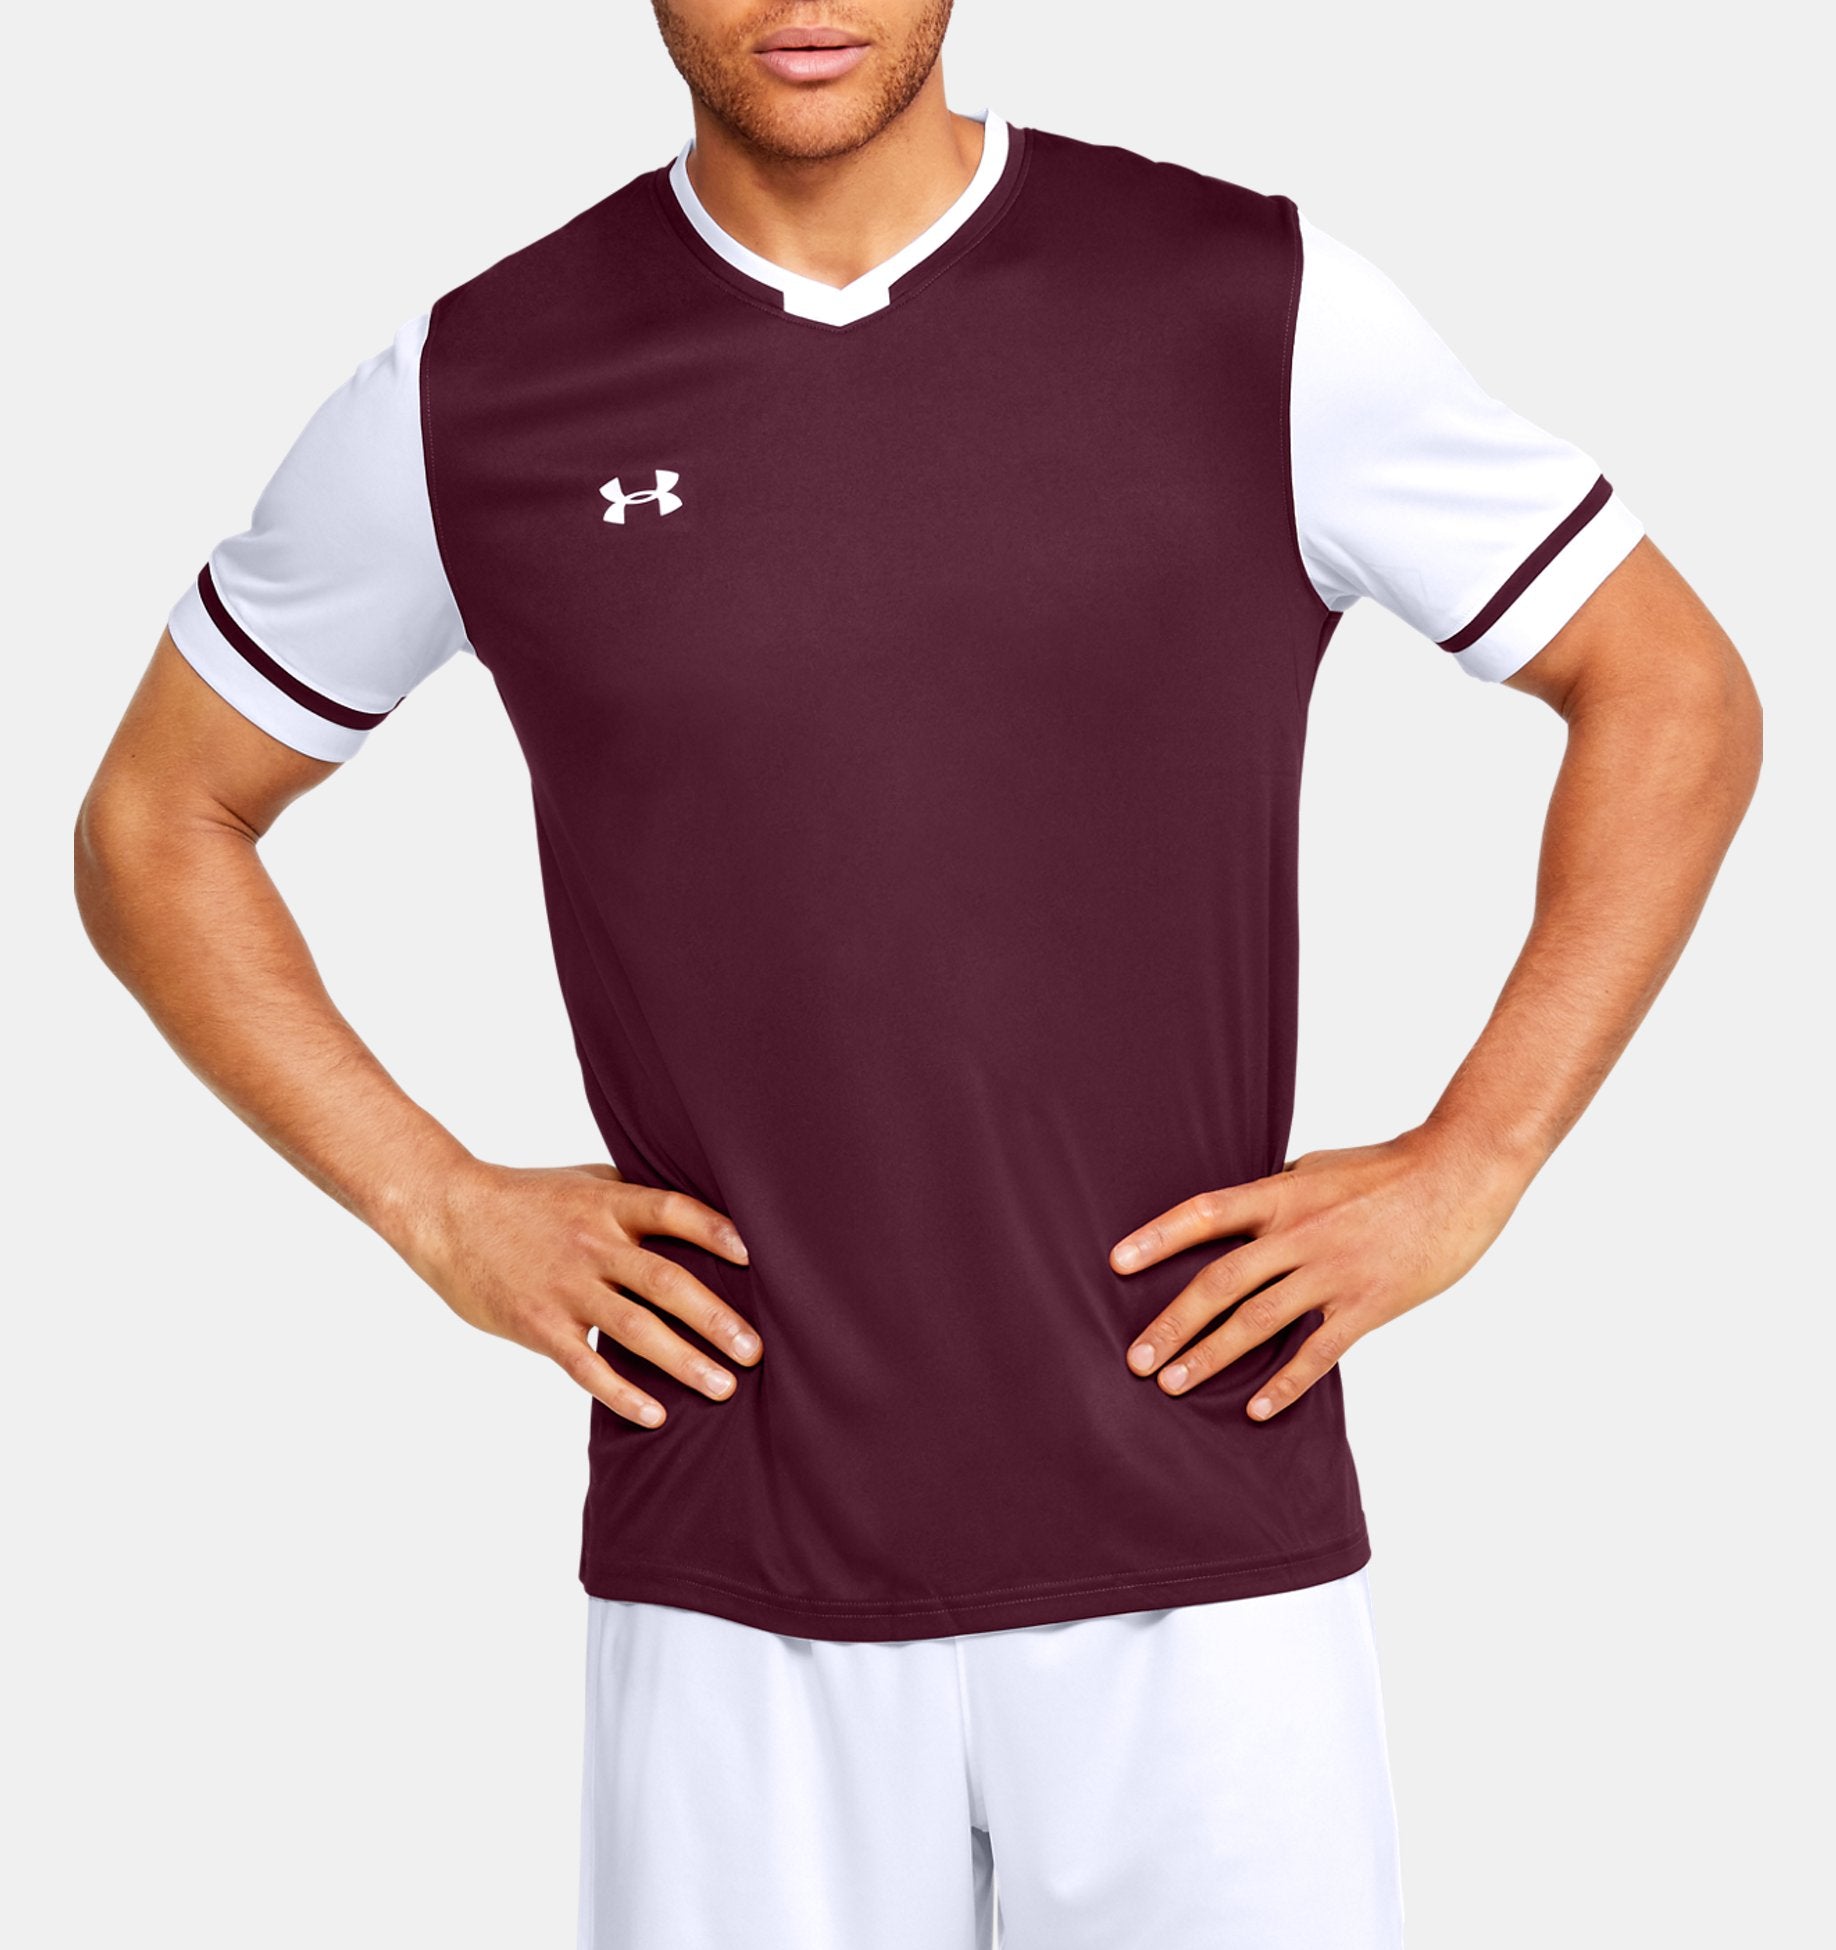 Under Armour Maquina 2.0 Jersey Maroon